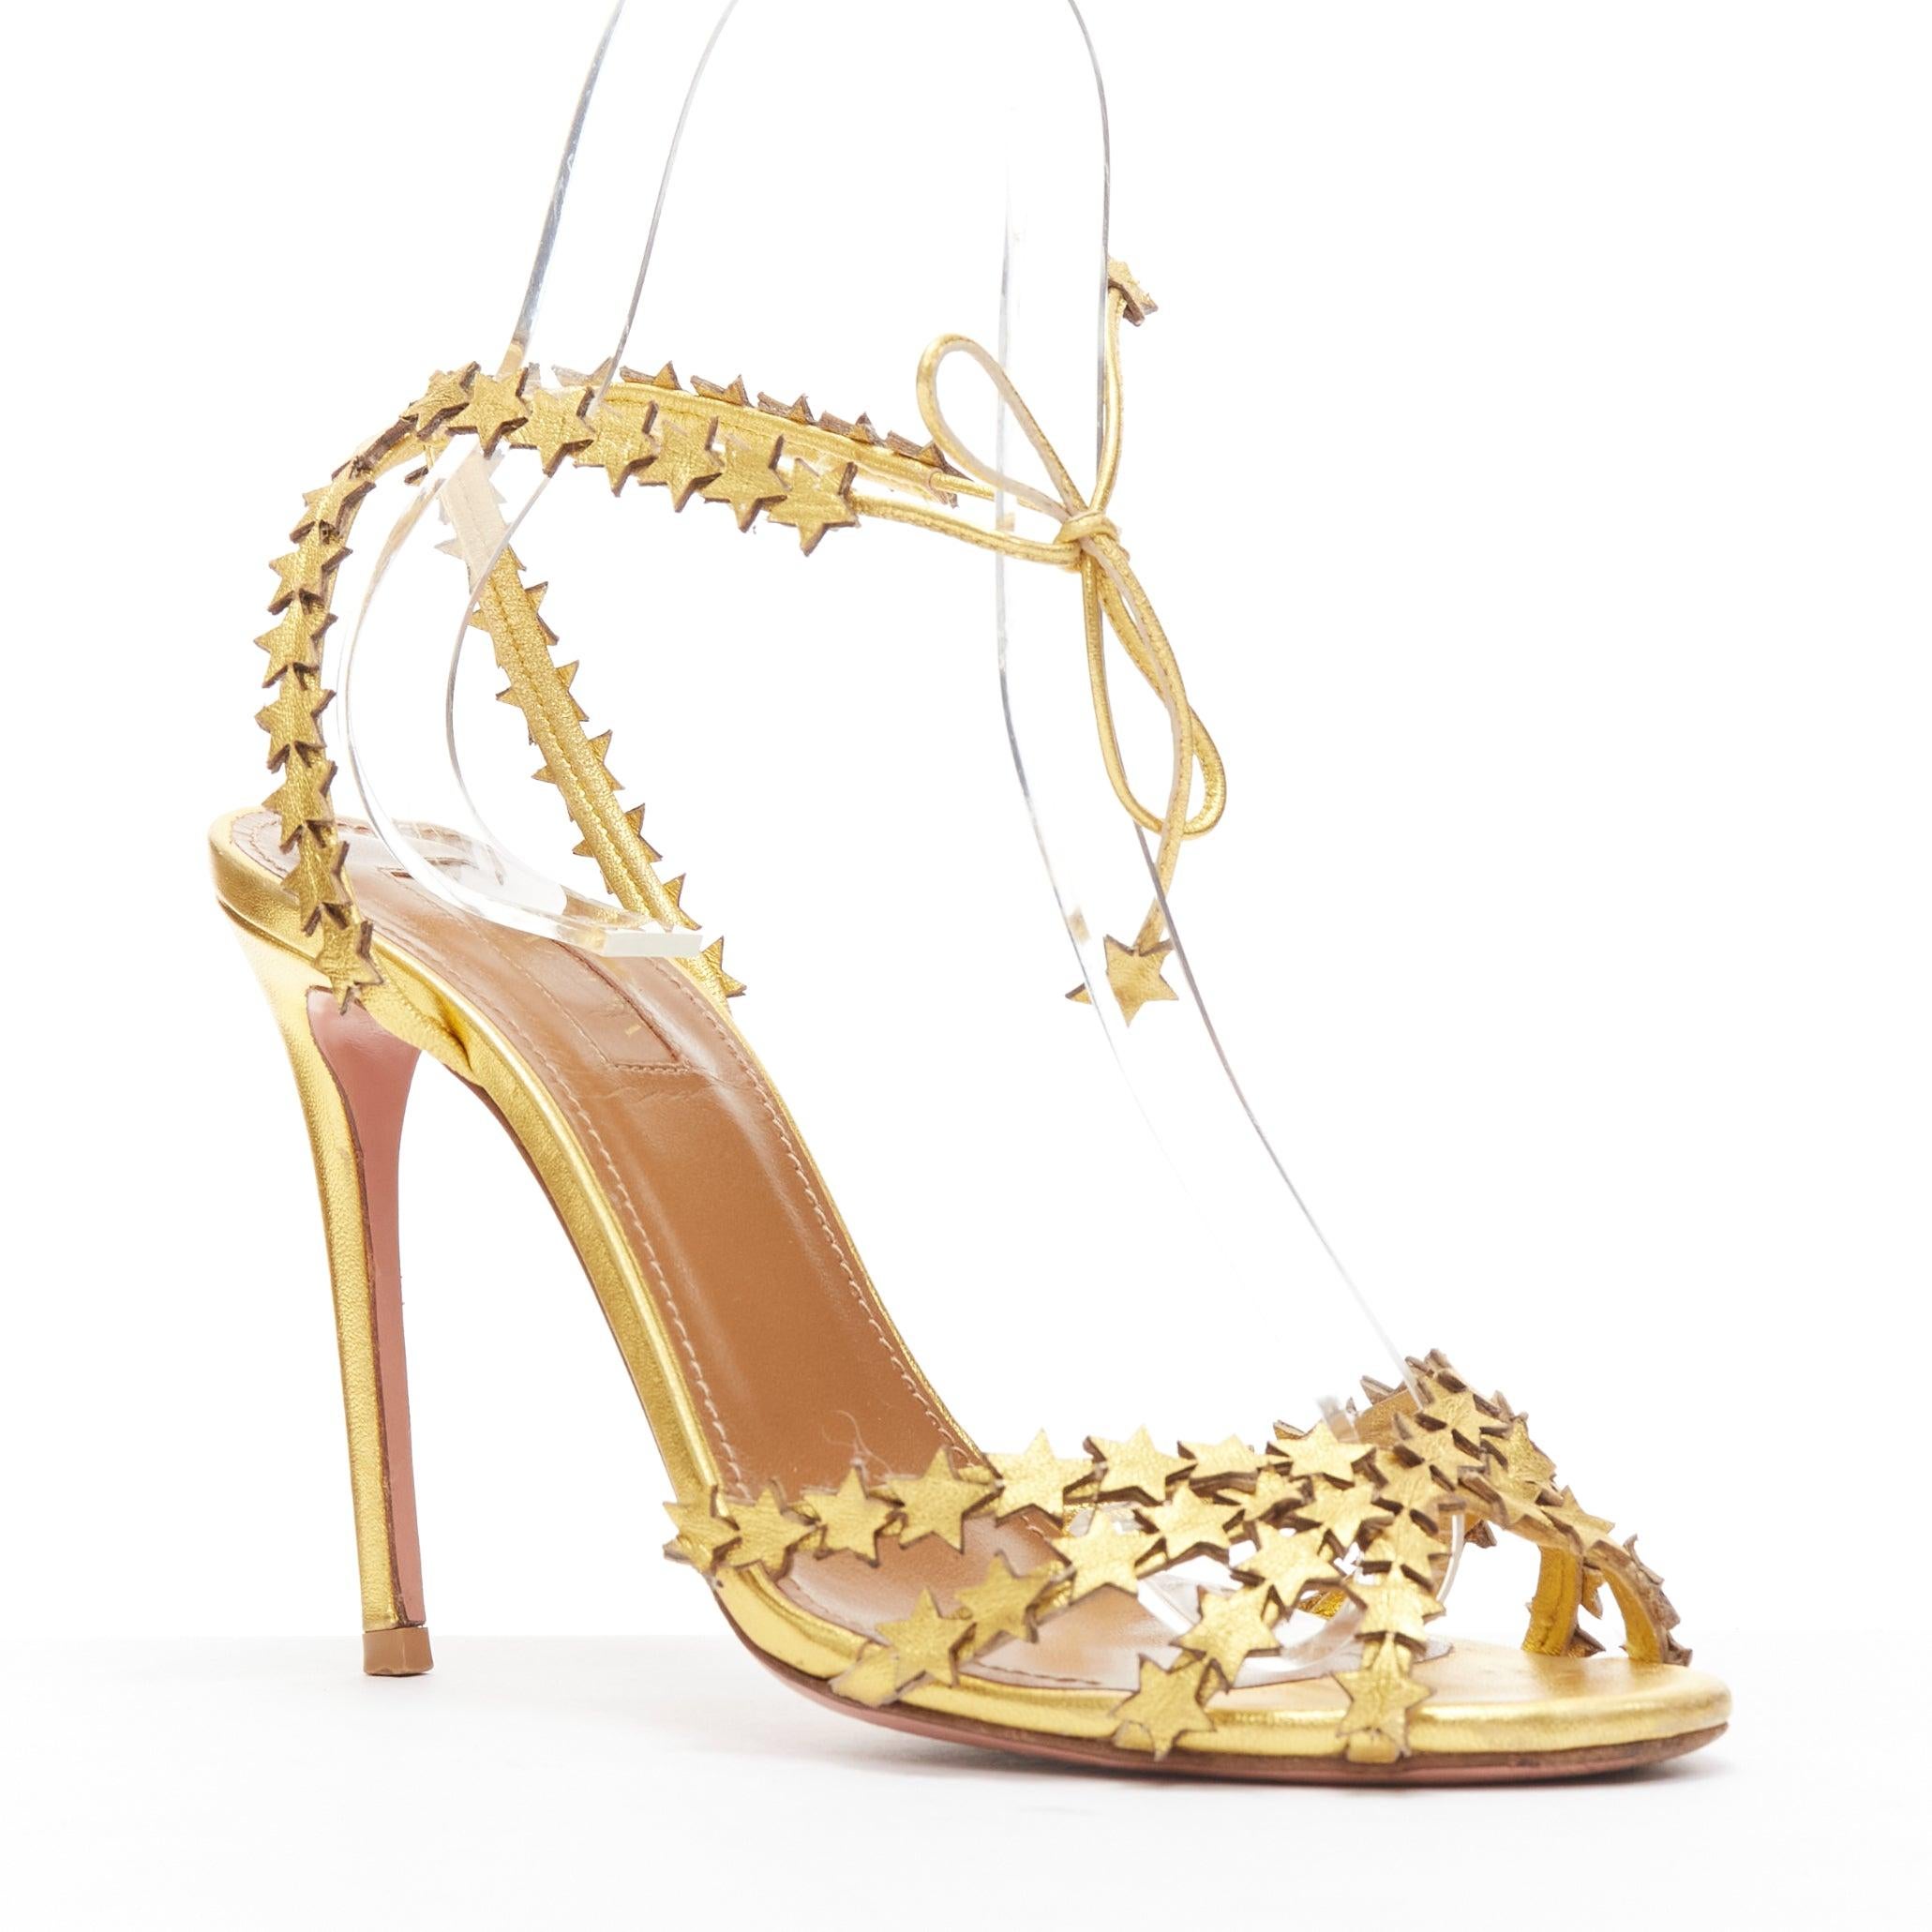 AQUAZZURA Starlight 105 gold leather star cutout strappy sandal heel EU36.5
Reference: JACG/A00152
Brand: Aquazzura
Model: Starlight 105
Material: Leather
Color: Gold
Pattern: Solid
Closure: Ankle Strap
Lining: Brown Leather
Extra Details: Star